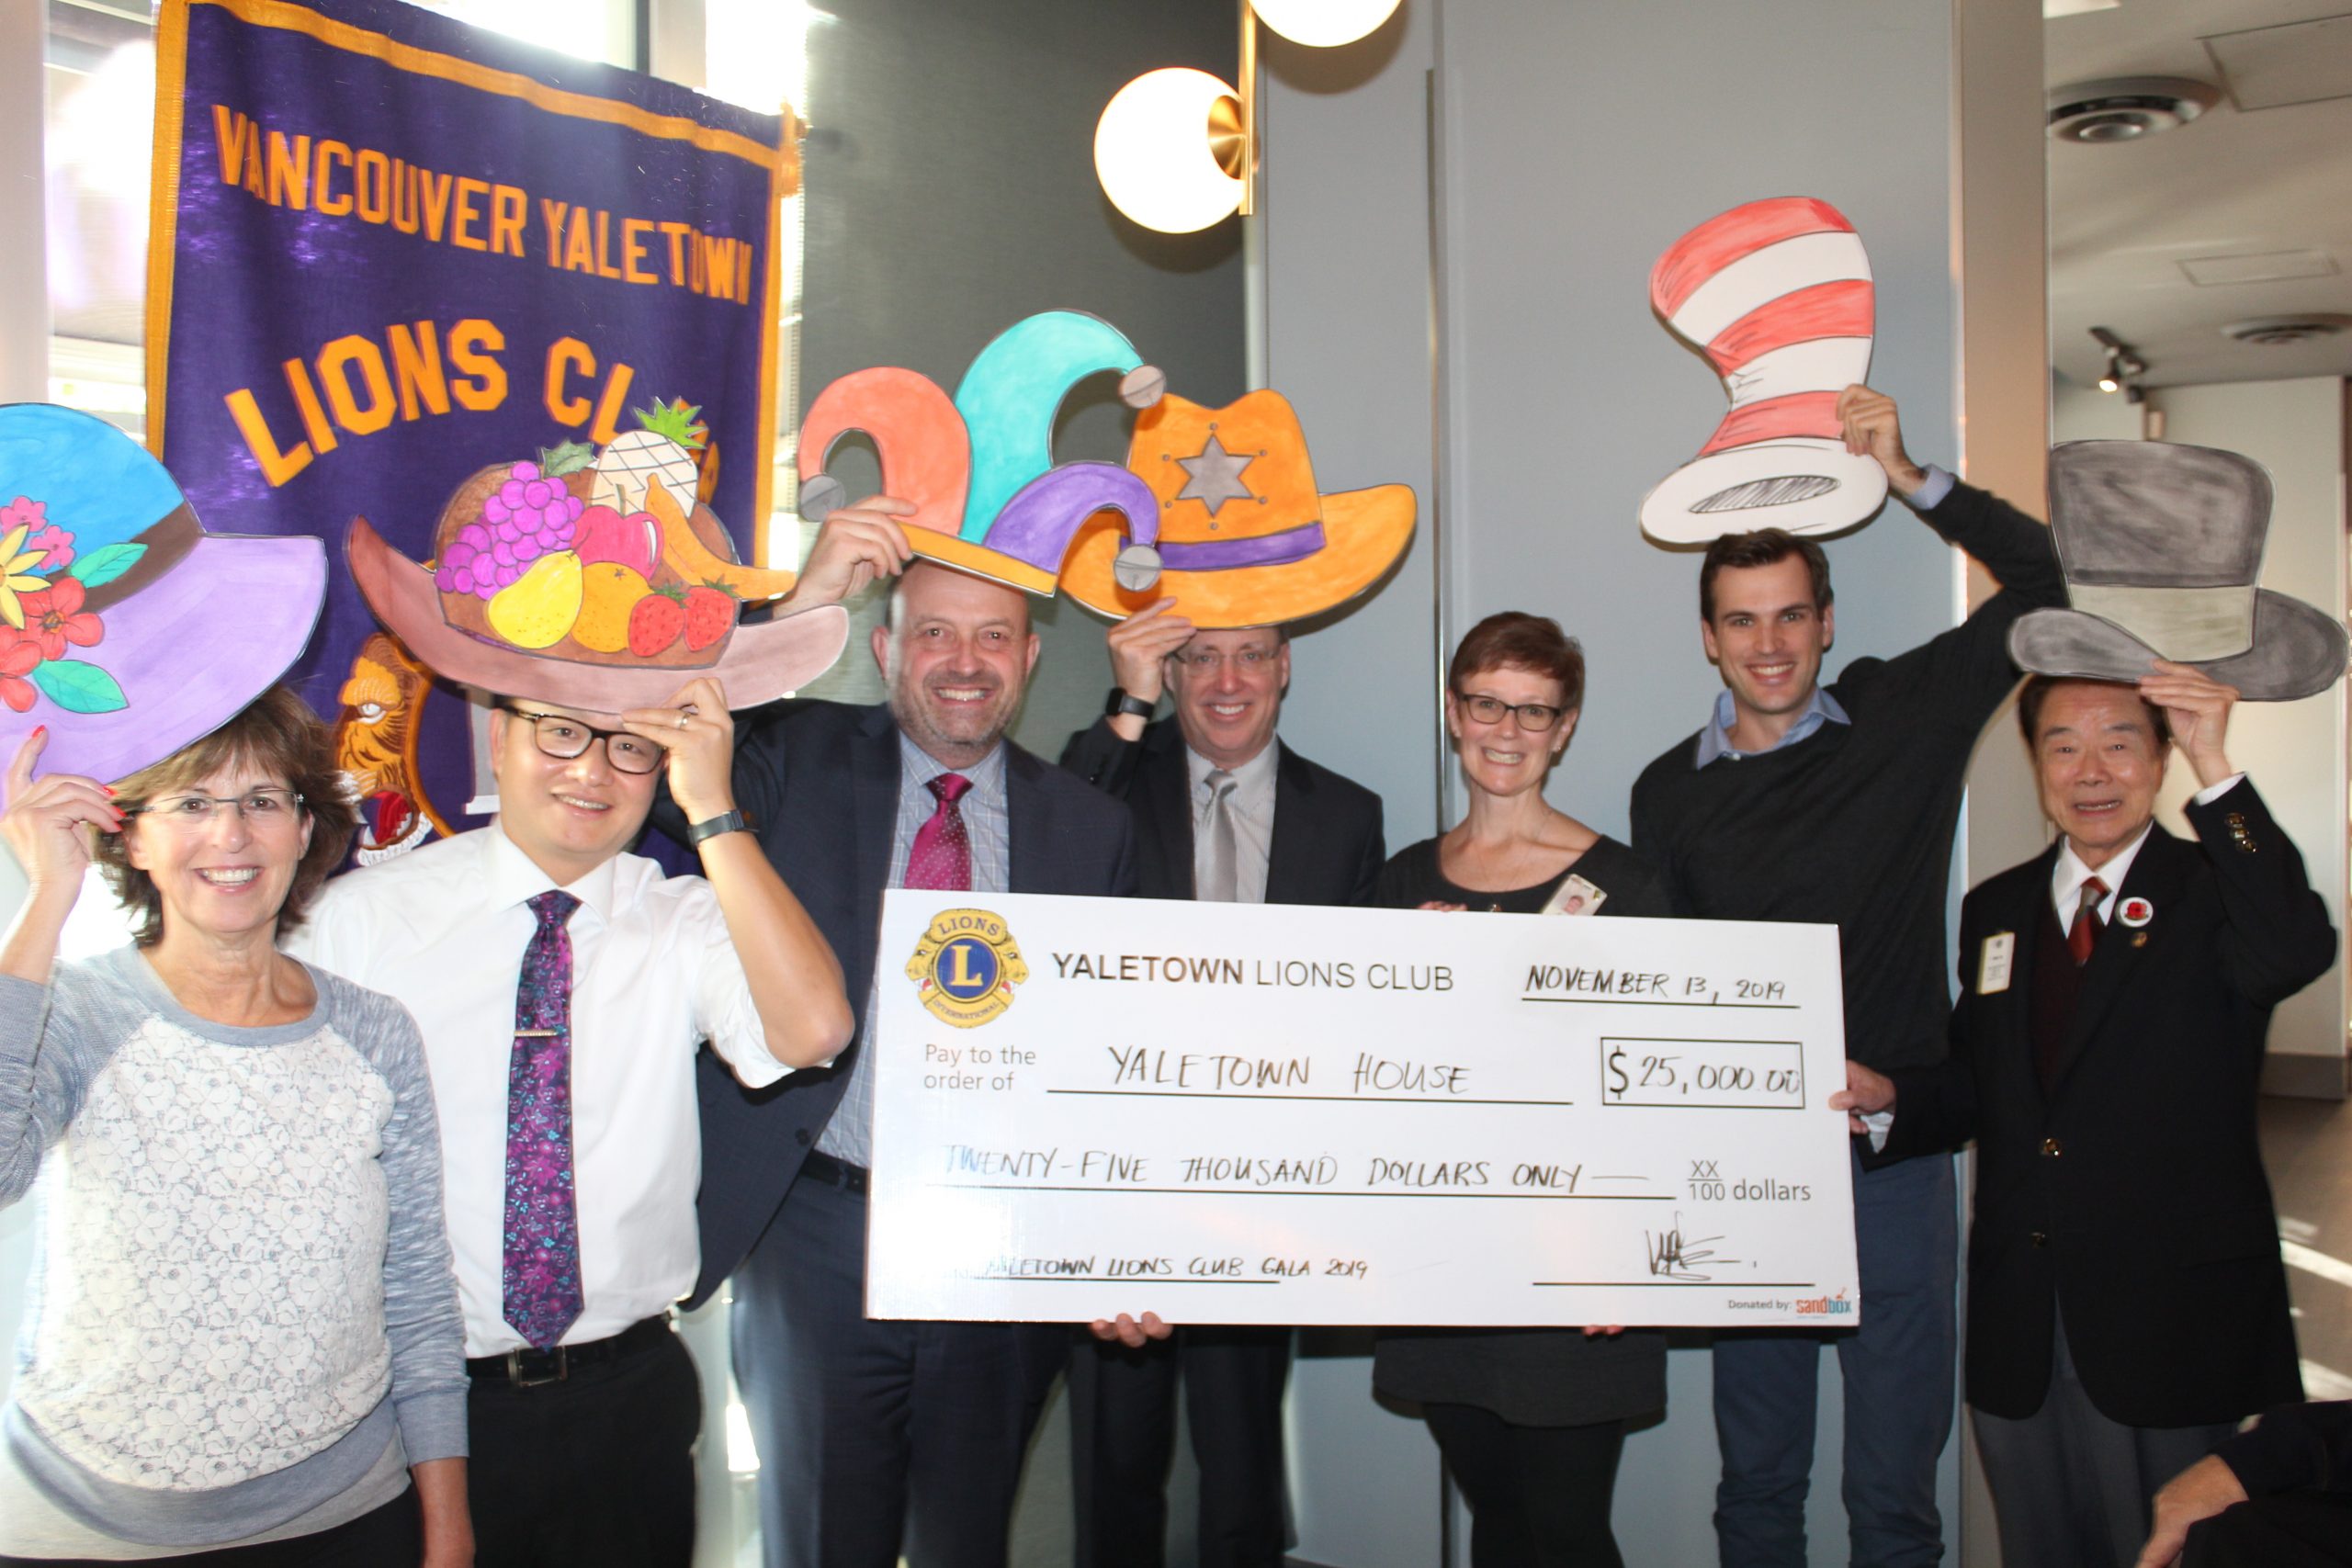 You are currently viewing Yaletown Lions Club – Another Roaring Success with $25,000 Donated